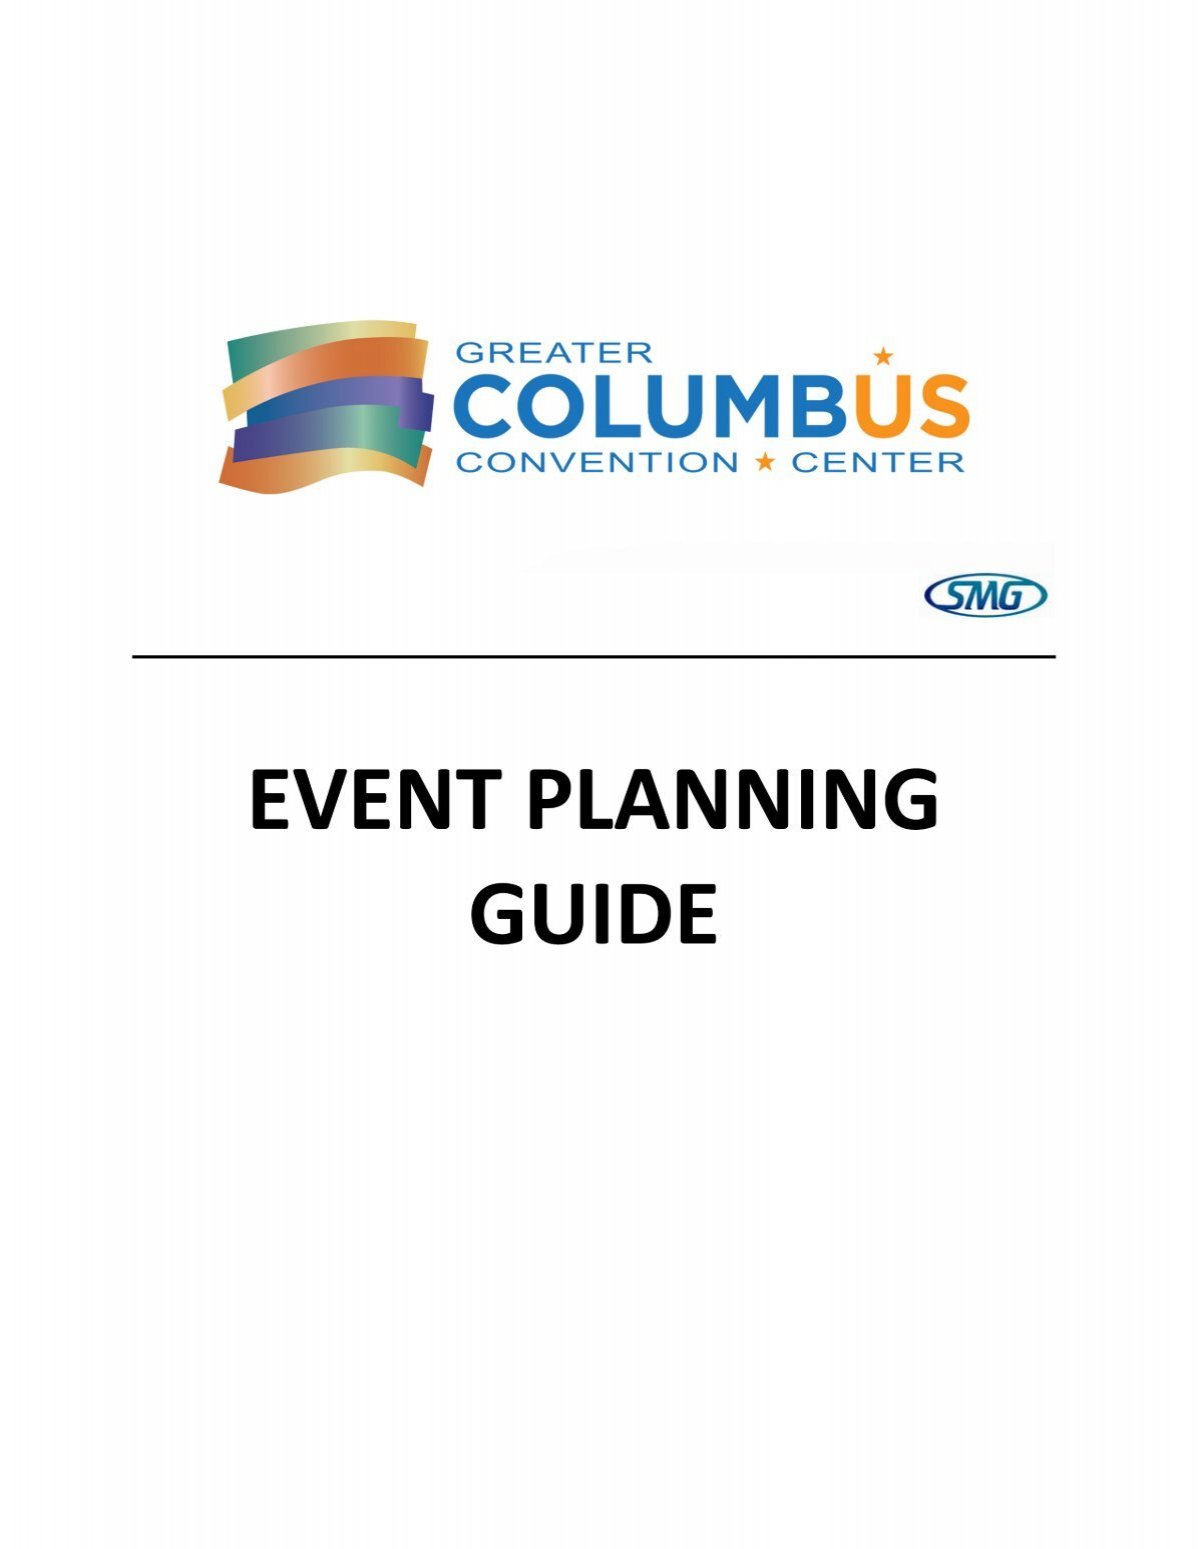 Event Planning Guide The Greater Columbus Convention Center